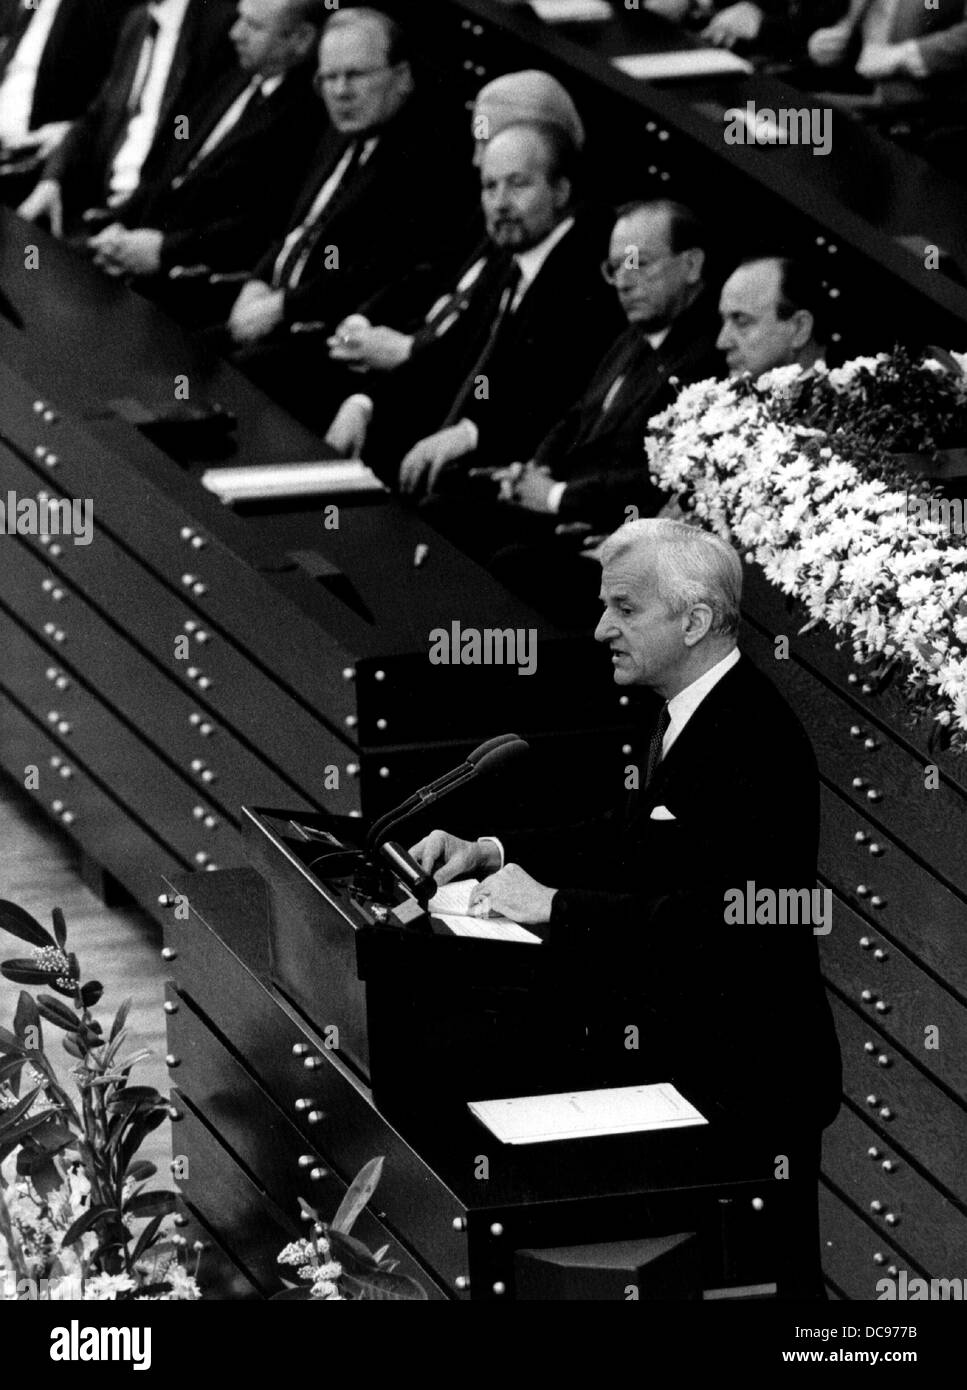 German president Richard von Weizsäcker during his much-noticed speech in the Bundestag in Bonn on the 8th of May in 1985 on the occasion of the 40th anniversary of the end of World War II. Stock Photo